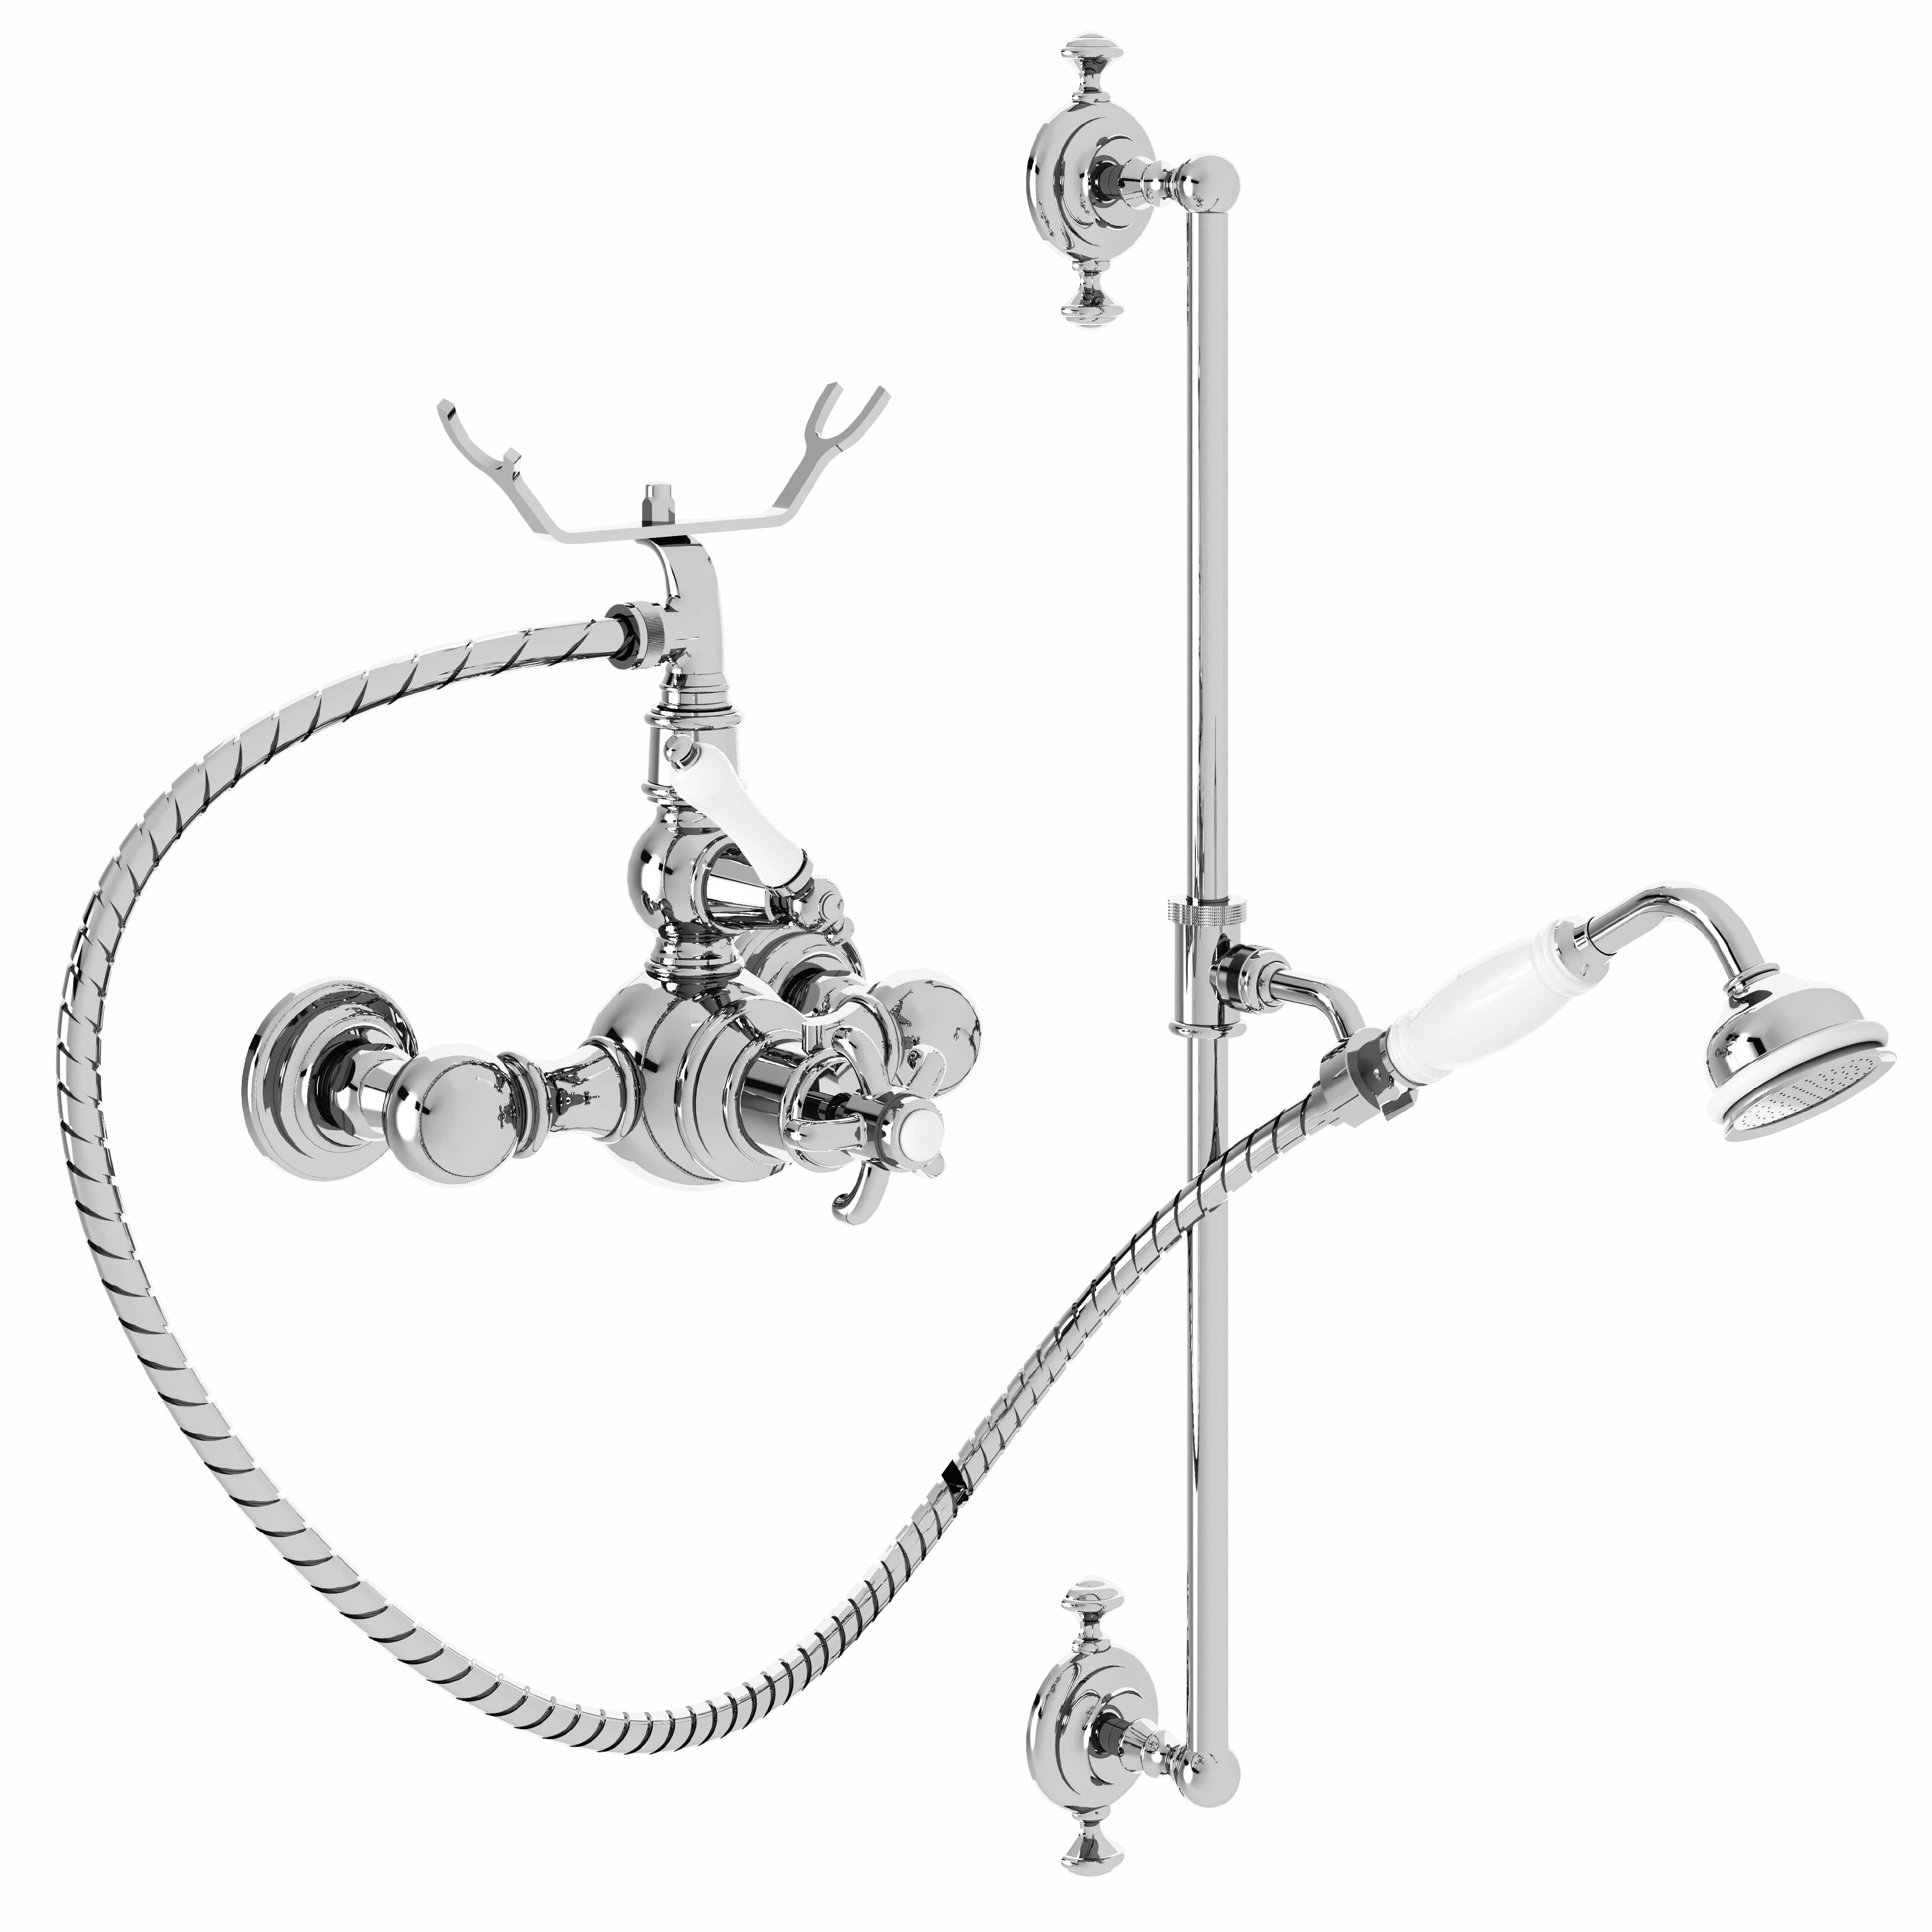 M01-2202T Mitigeur thermo. douche, coulidouche